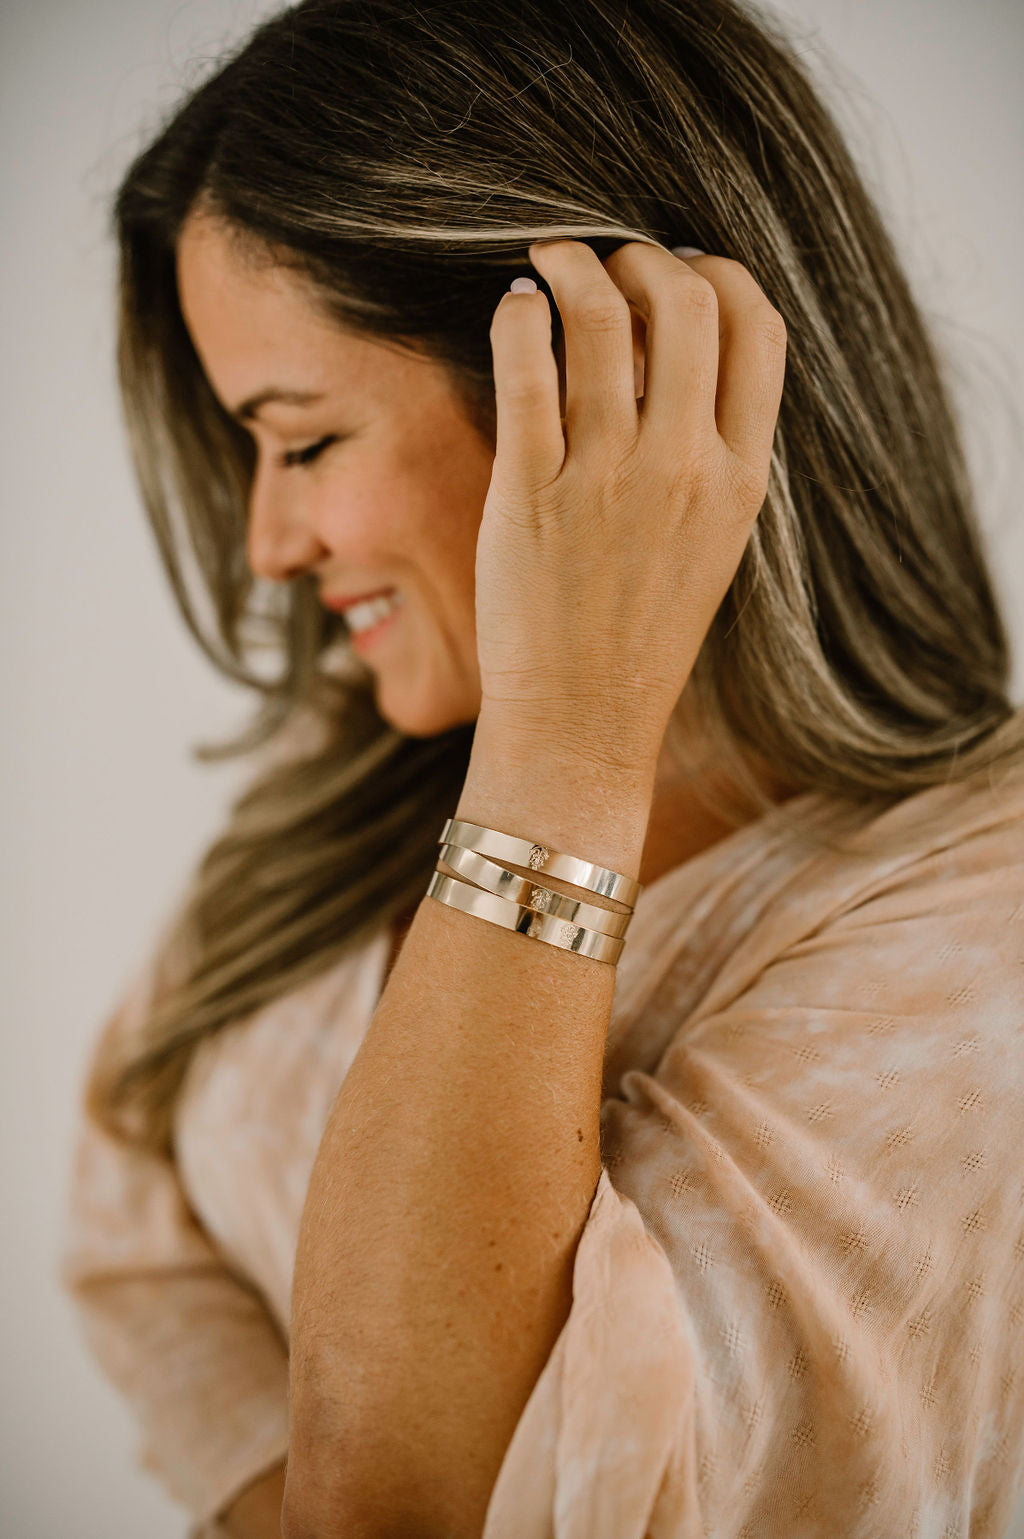 Natalie from Growing the Pizarro's modeling a trio of gold filled adjustable bracelets. 